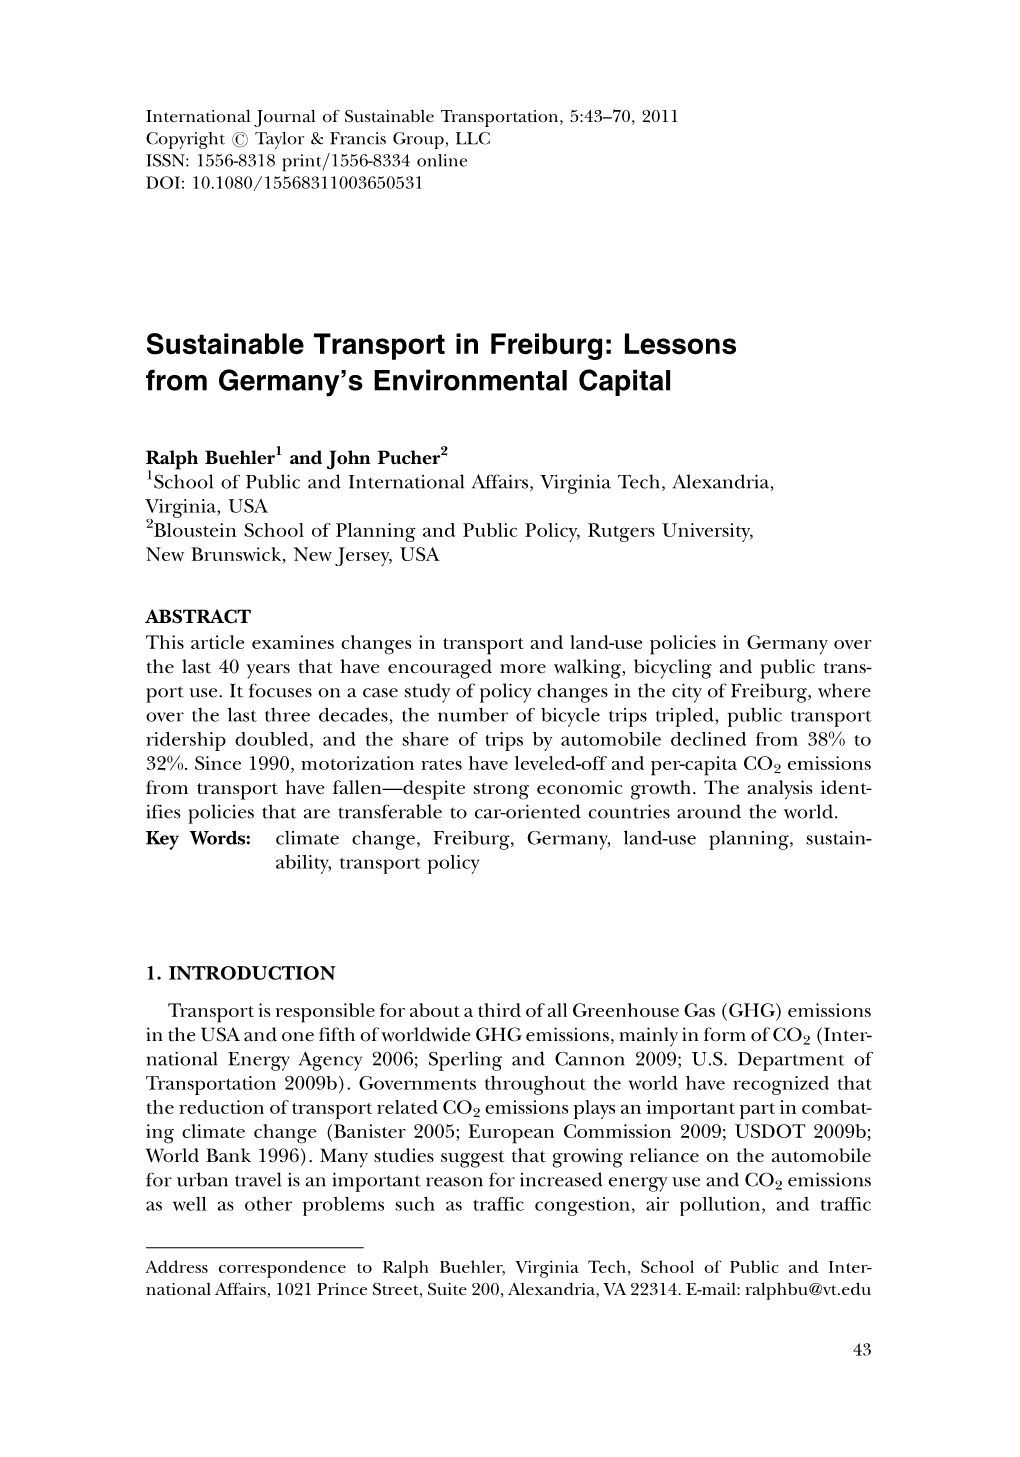 Sustainable Transport in Freiburg: Lessons from Germany's